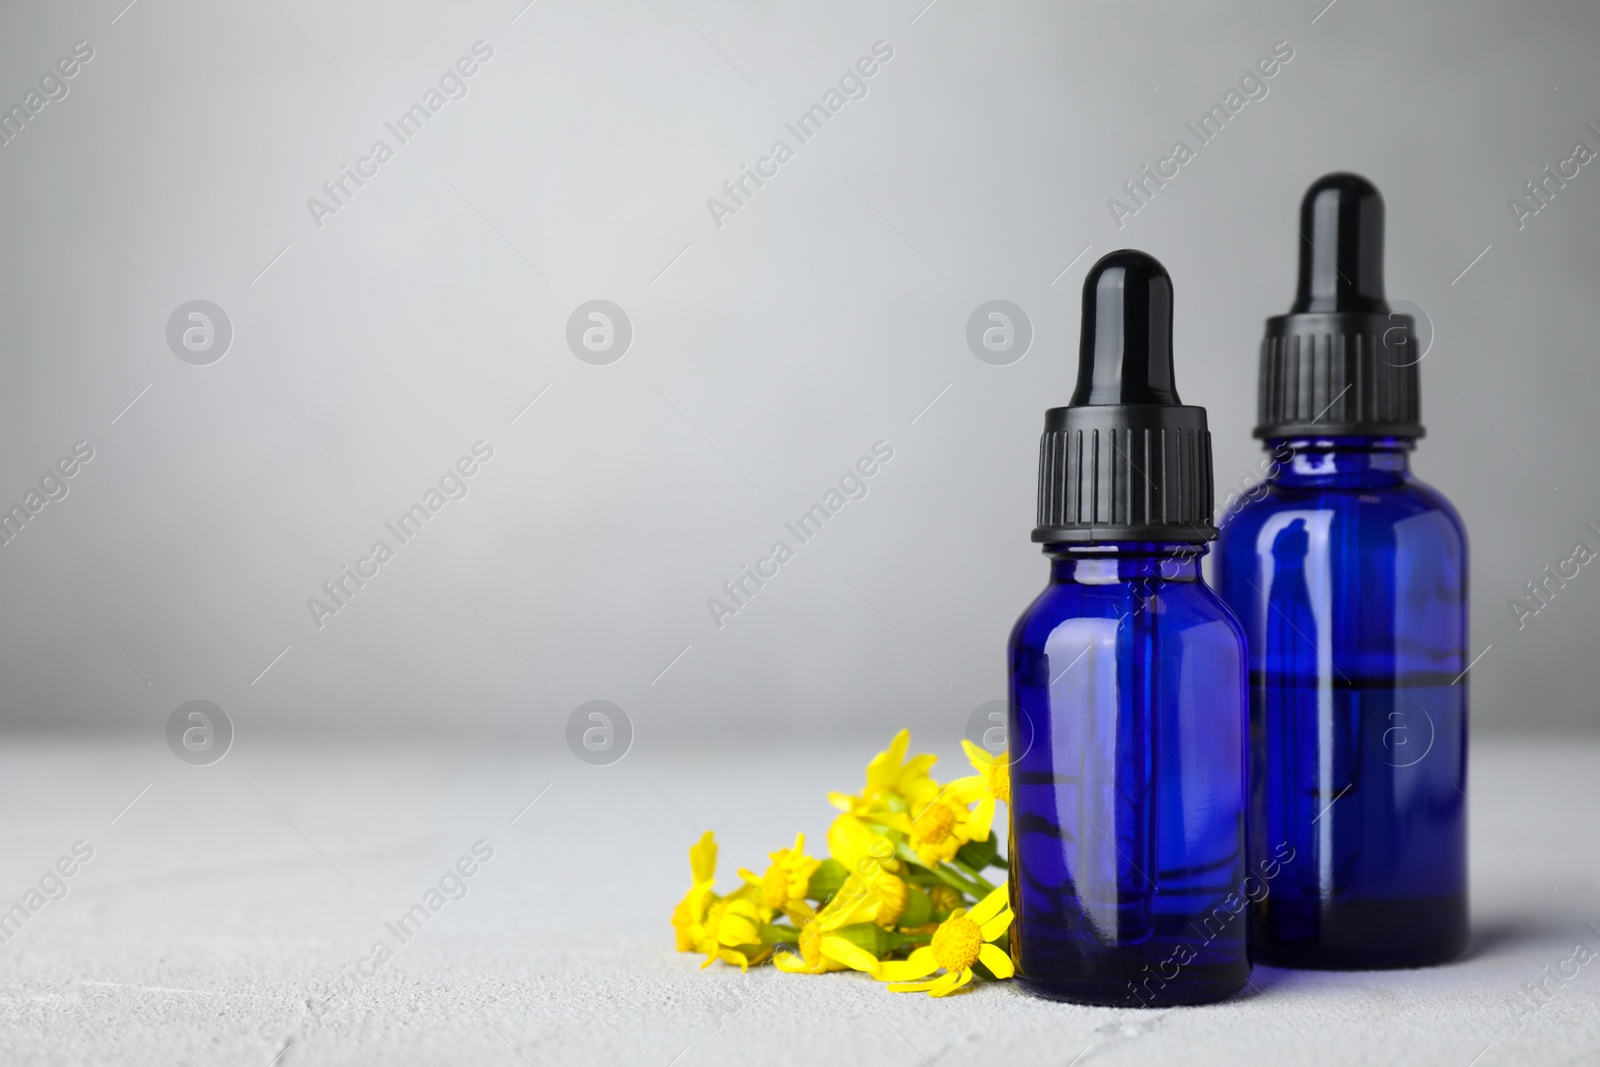 Photo of Bottles of essential oil and flowers on grey table, space for text